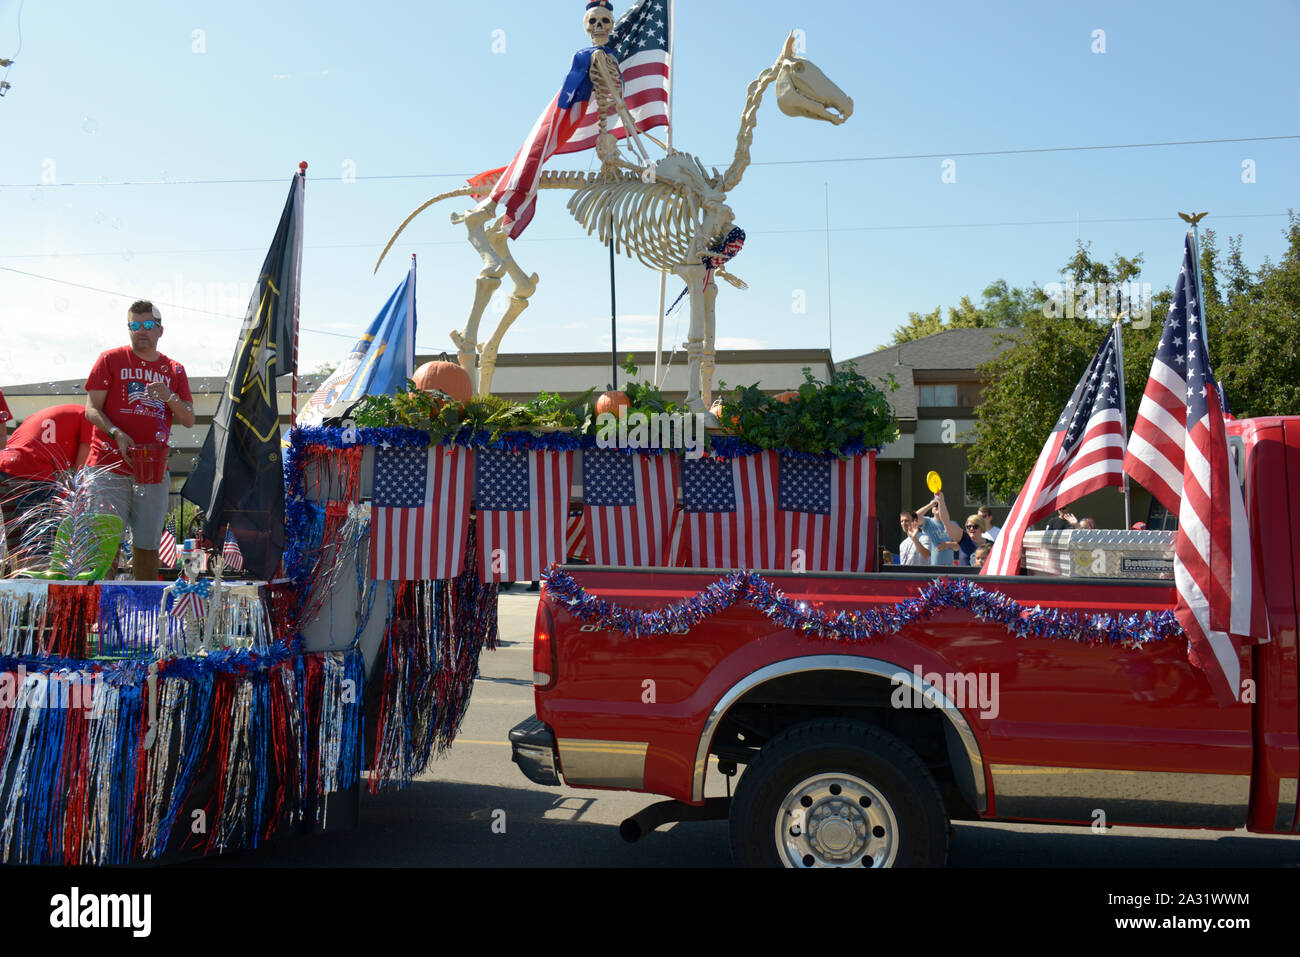 Parade Floats, American flags, Float, July 4, Independence Day